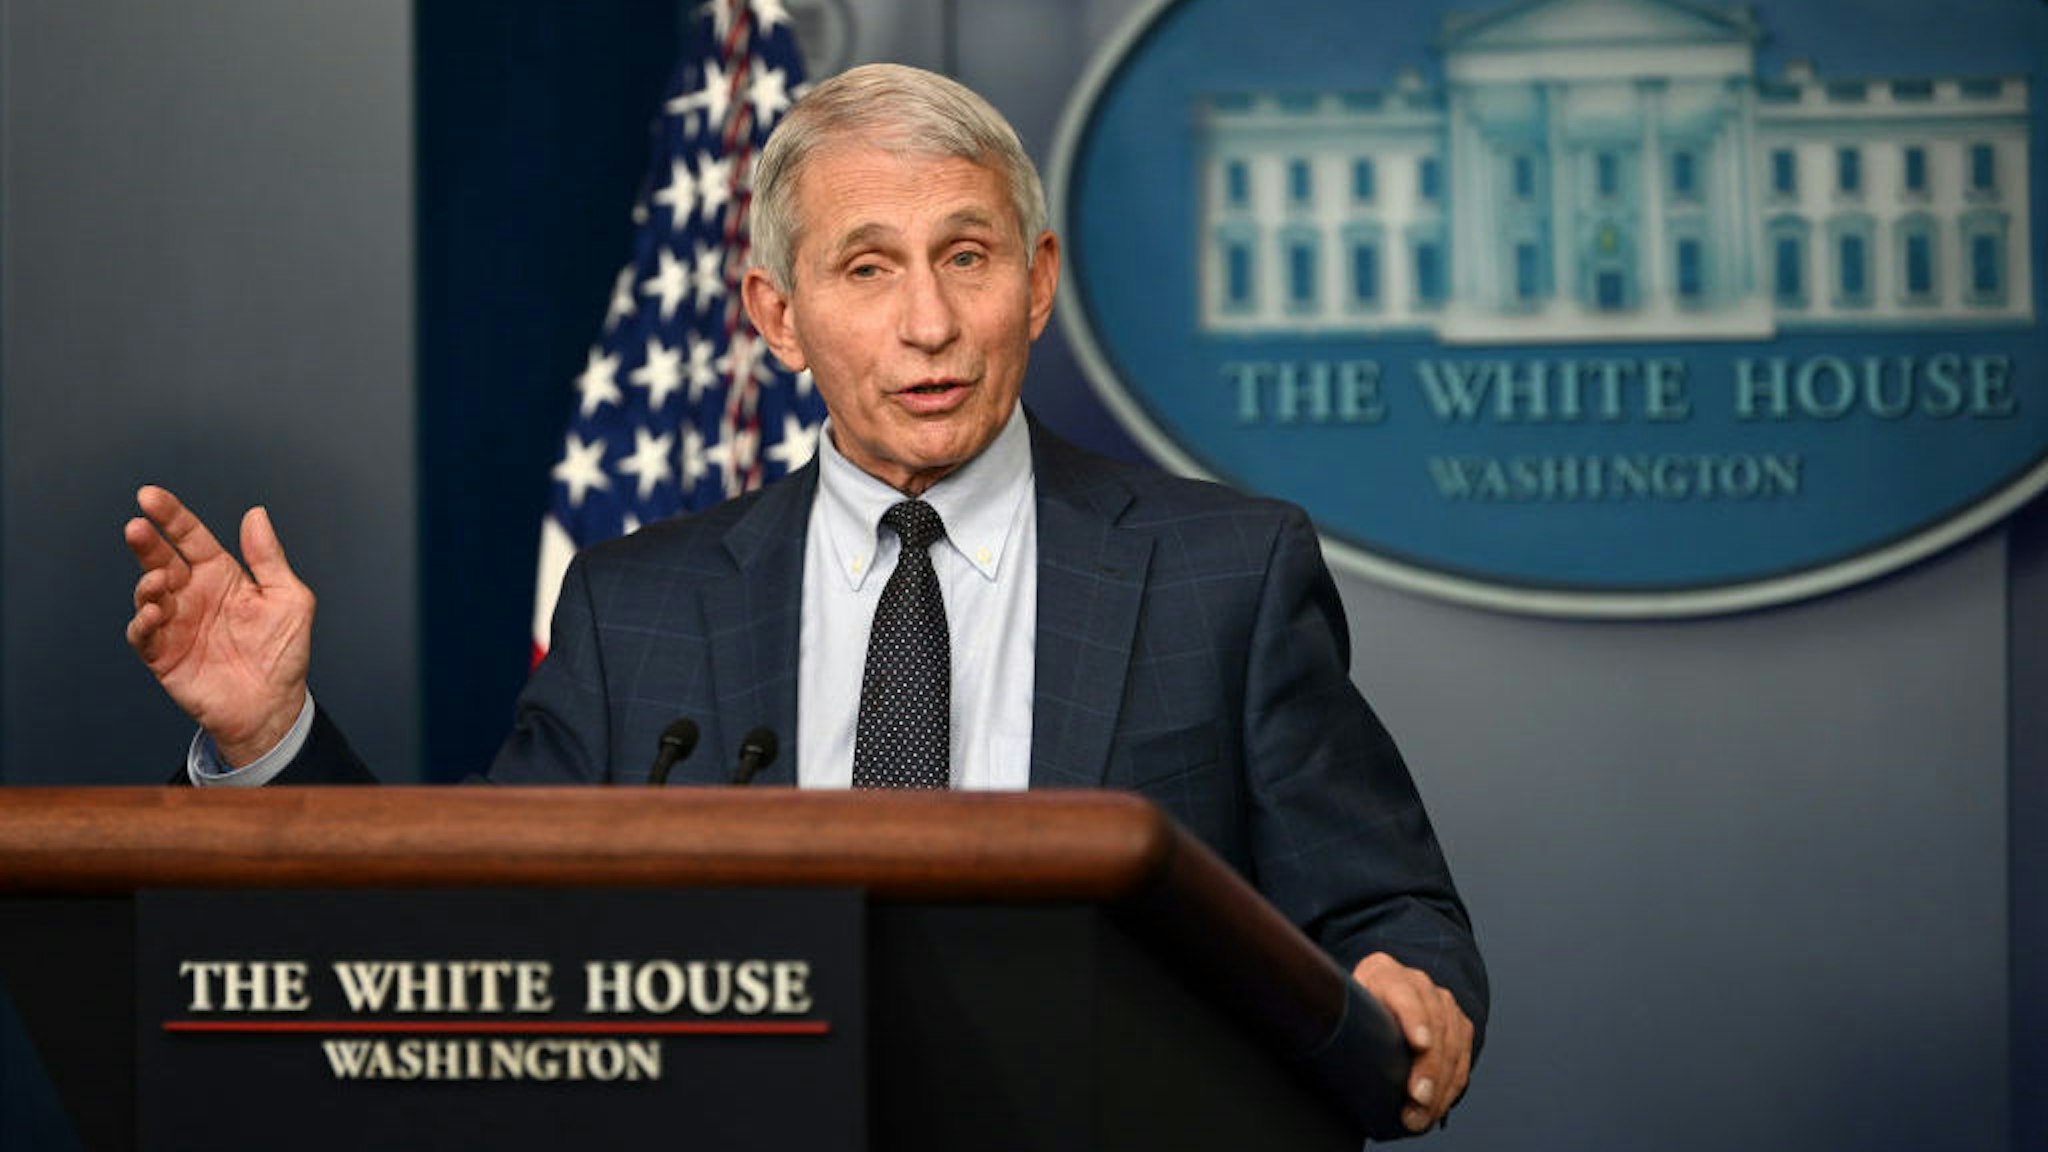 WASHINGTON, DC - DECEMBER 01: Director of the National Institute of Allergy and Infectious Diseases Anthony Fauci gives an update on the Omicron COVID-19 variant during the daily press briefing at the White House on December 1, 2021 in Washington, DC. (Photo by Chen Mengtong/China News Service via Getty Images)